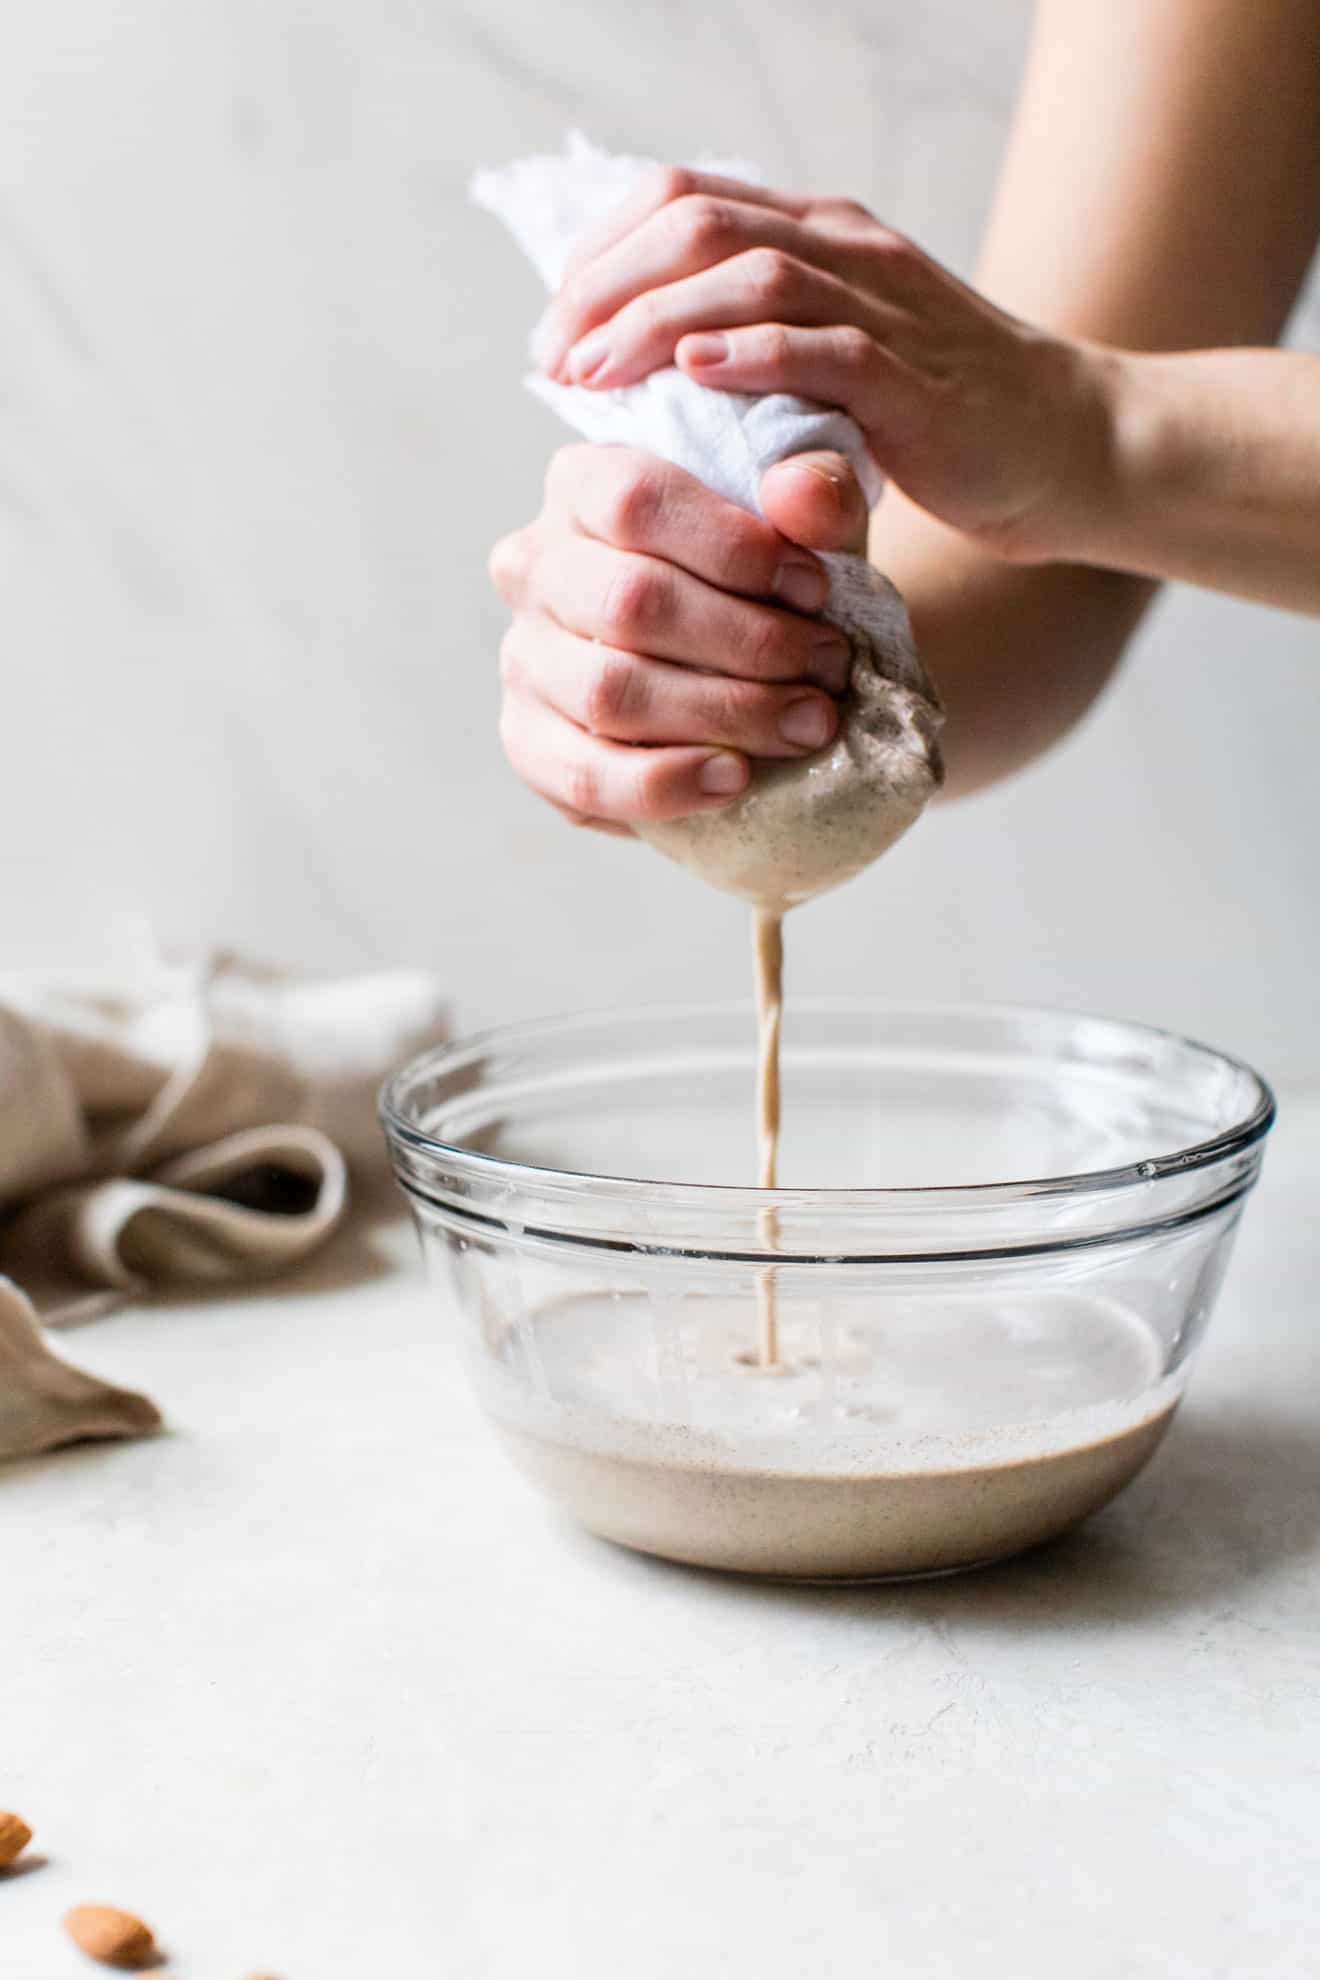 hands squeezing almond milk through a cheese cloth into a bowl on a white counter and white background